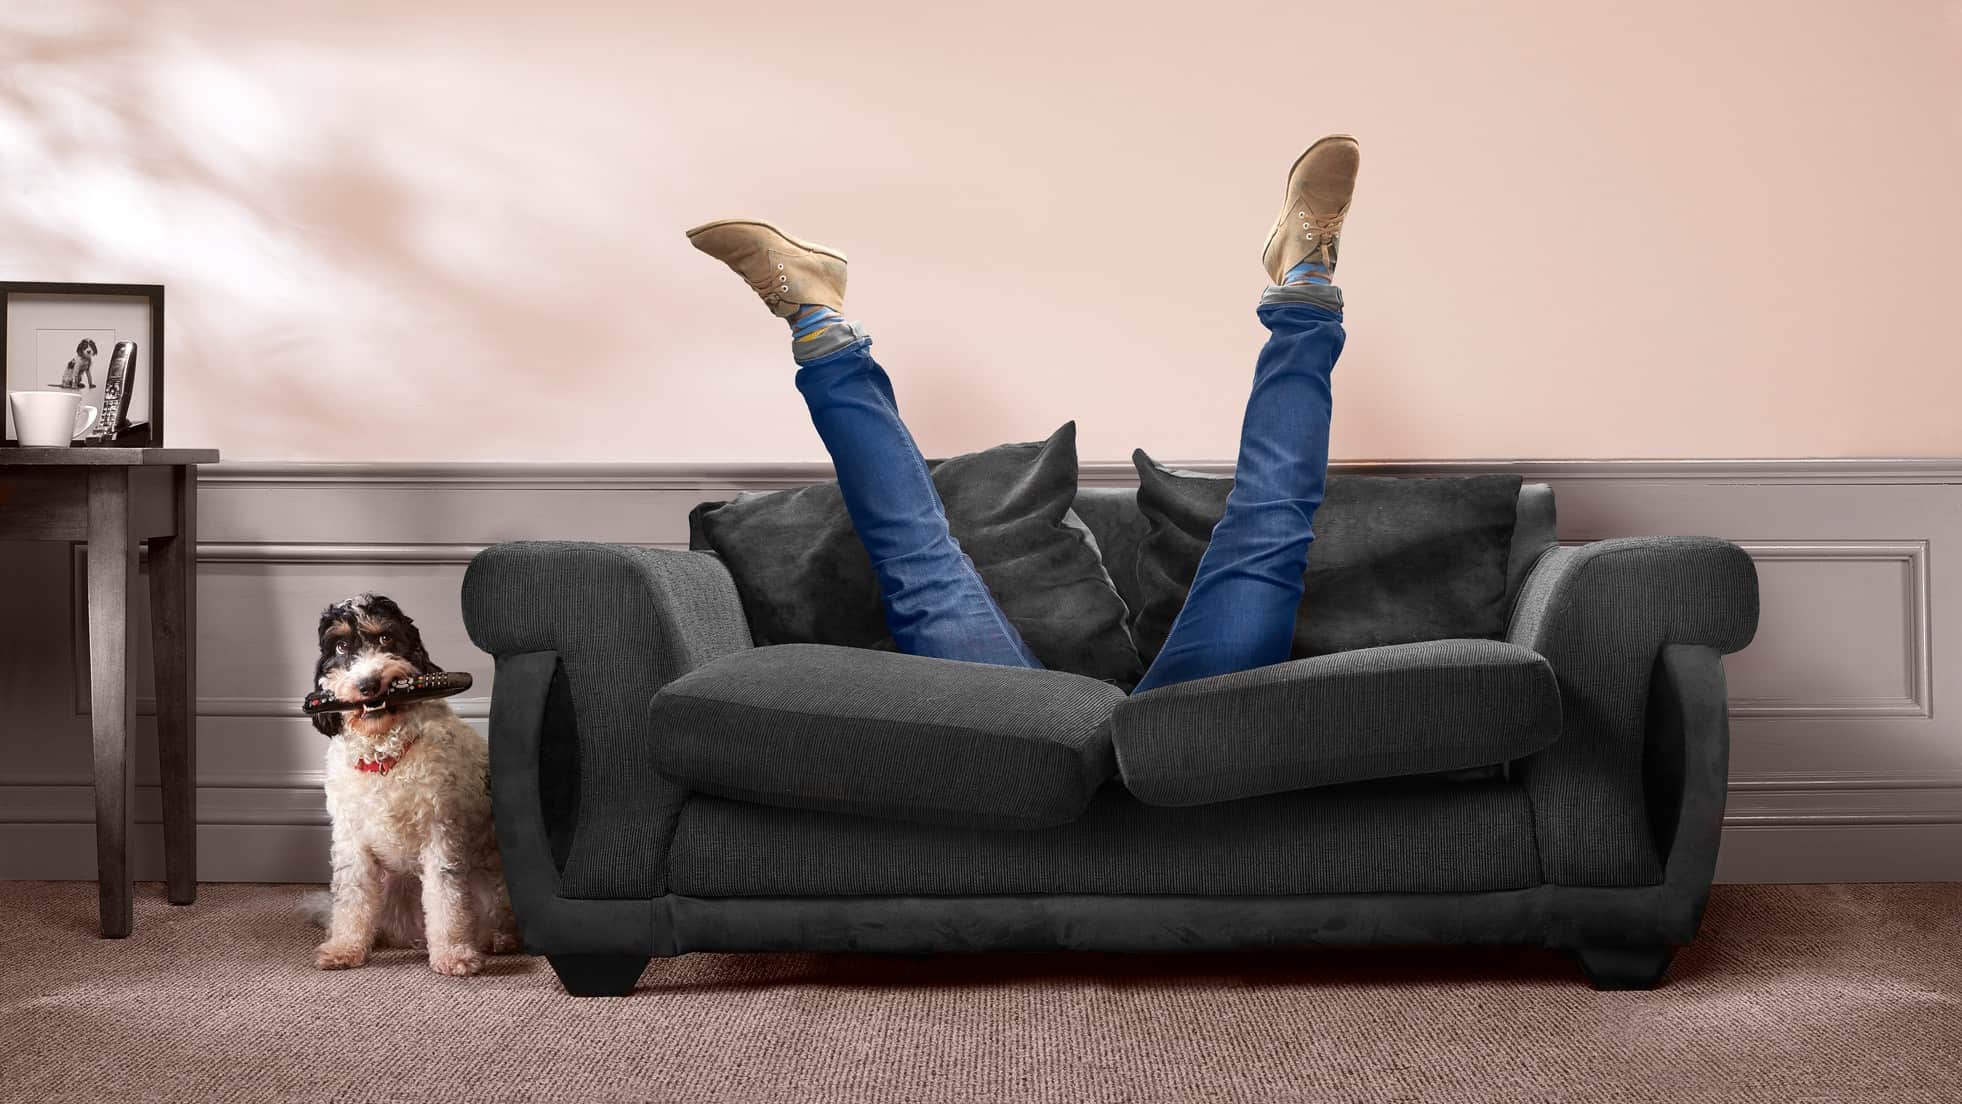 Explore 91+ Breathtaking Picture Sinking Into A Living Room Couch You Won't Be Disappointed